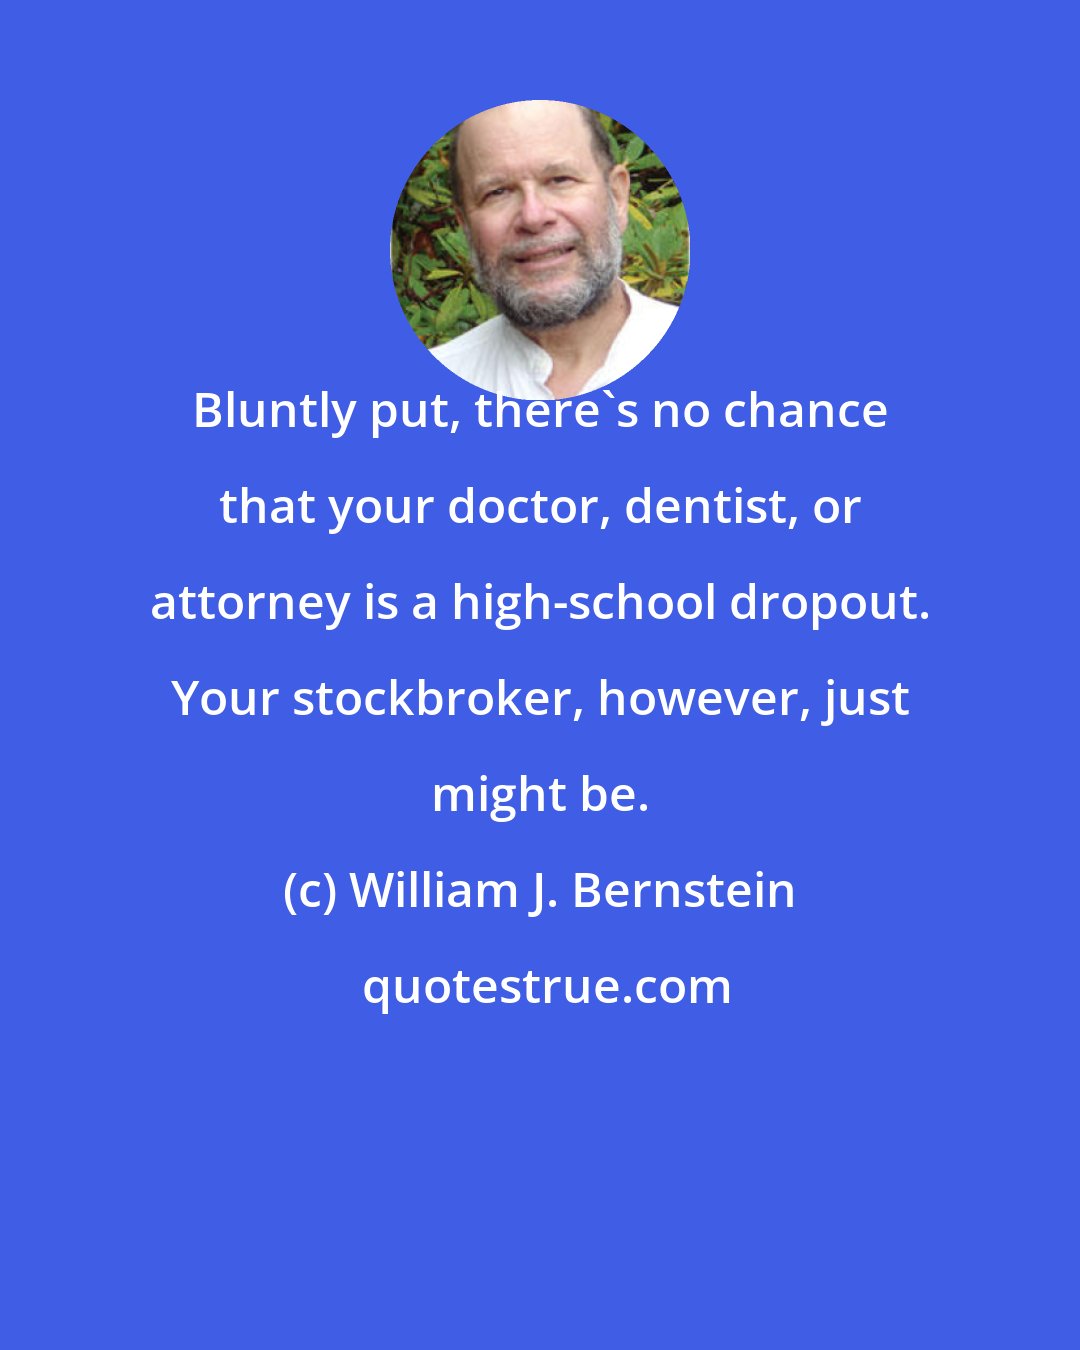 William J. Bernstein: Bluntly put, there's no chance that your doctor, dentist, or attorney is a high-school dropout. Your stockbroker, however, just might be.